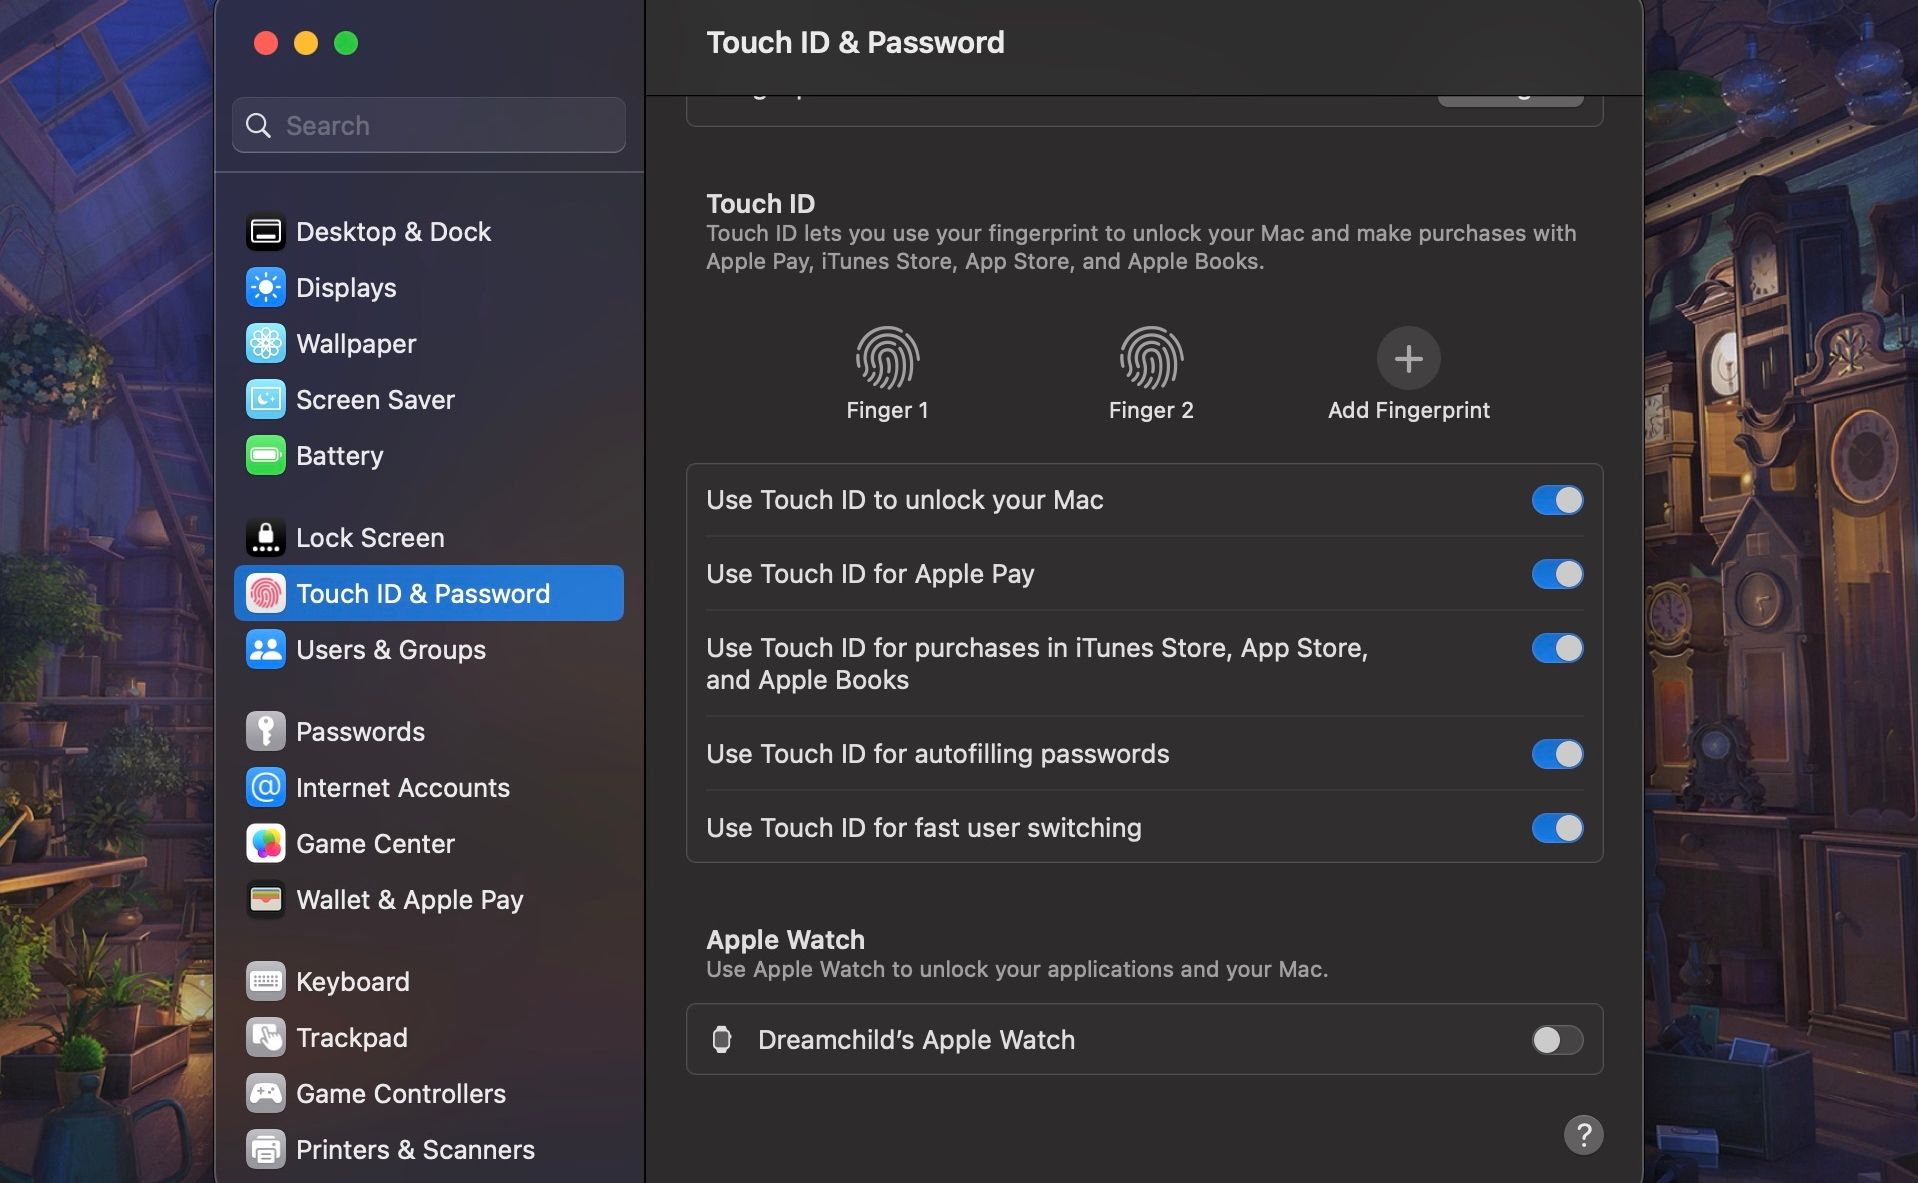 Touch ID & Password in System Settings